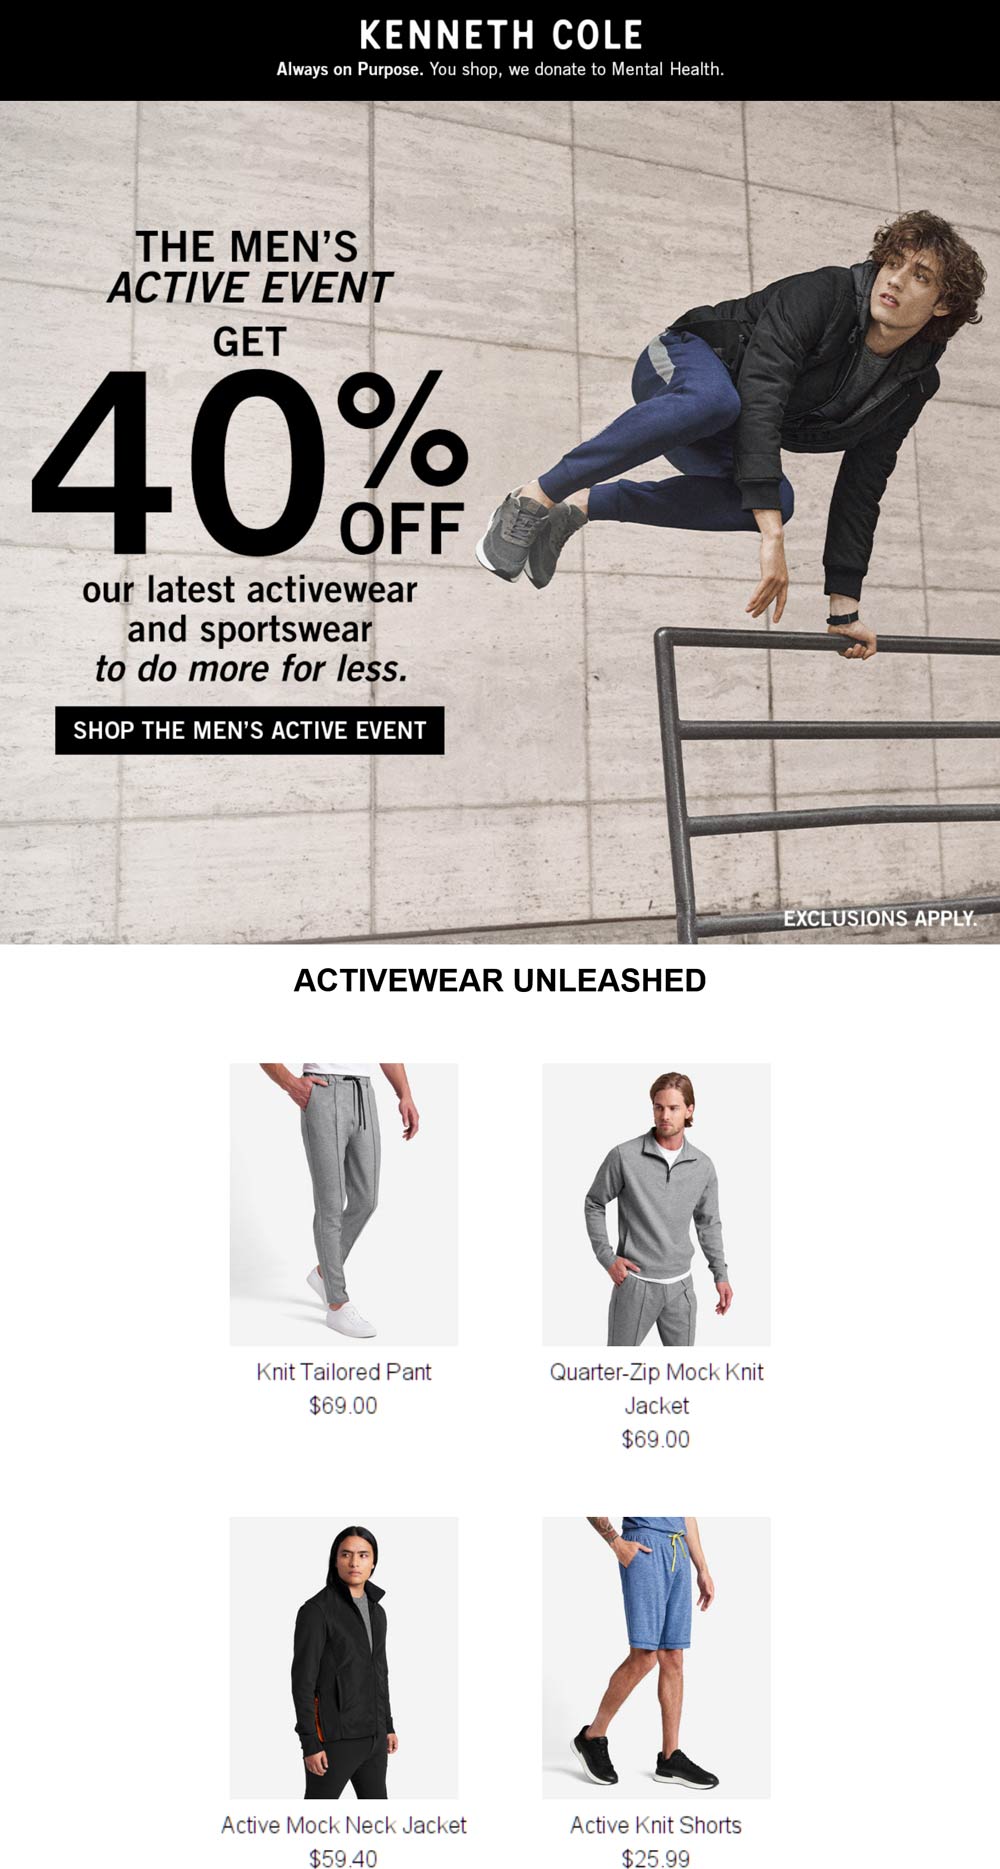 Kenneth Cole stores Coupon  40% off activewear & sportswear at Kenneth Cole #kennethcole 